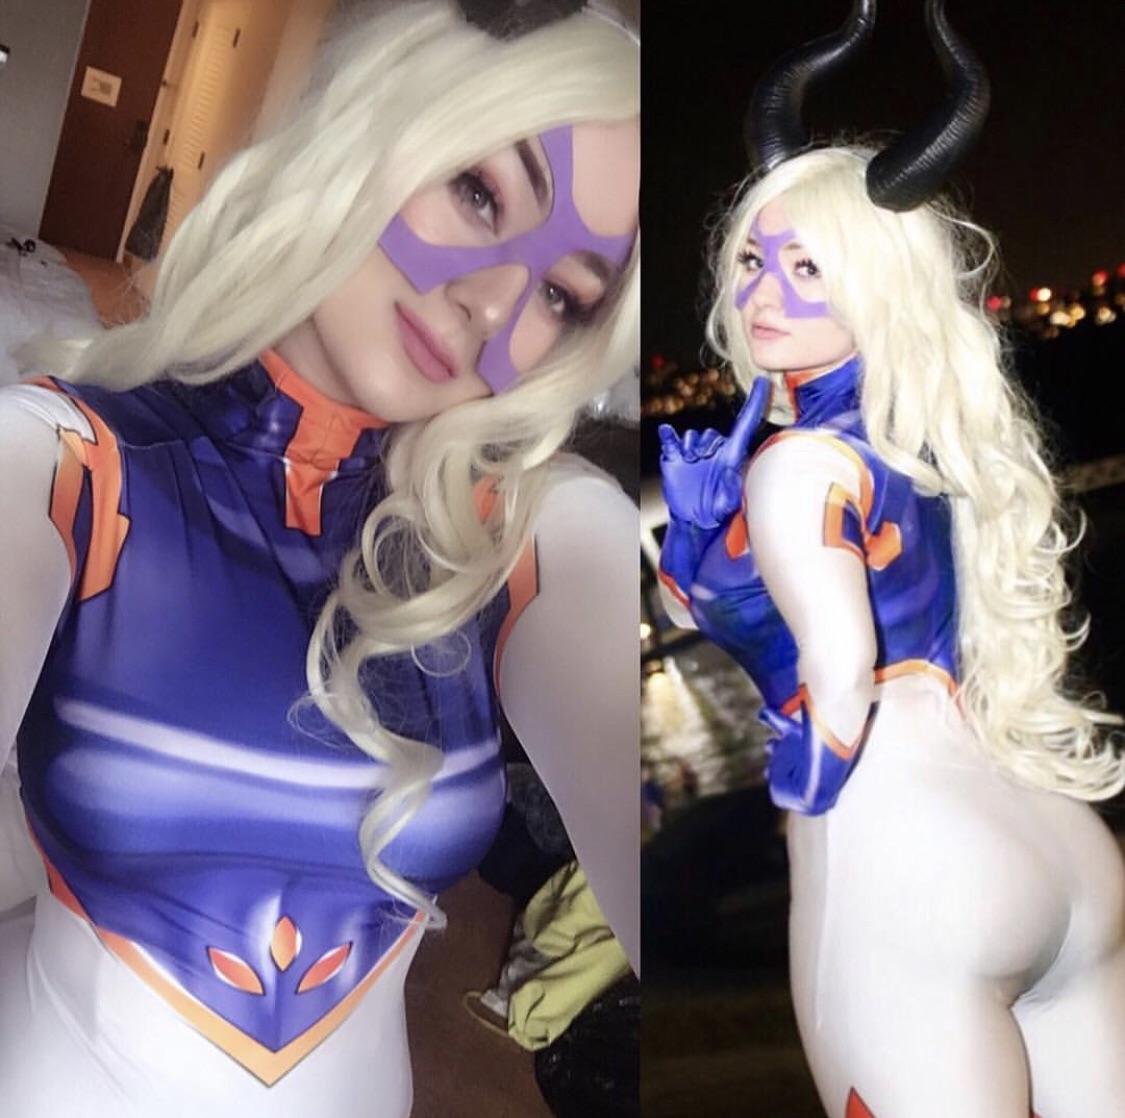 Mt Lady From My Hero Academia By Holly Mori